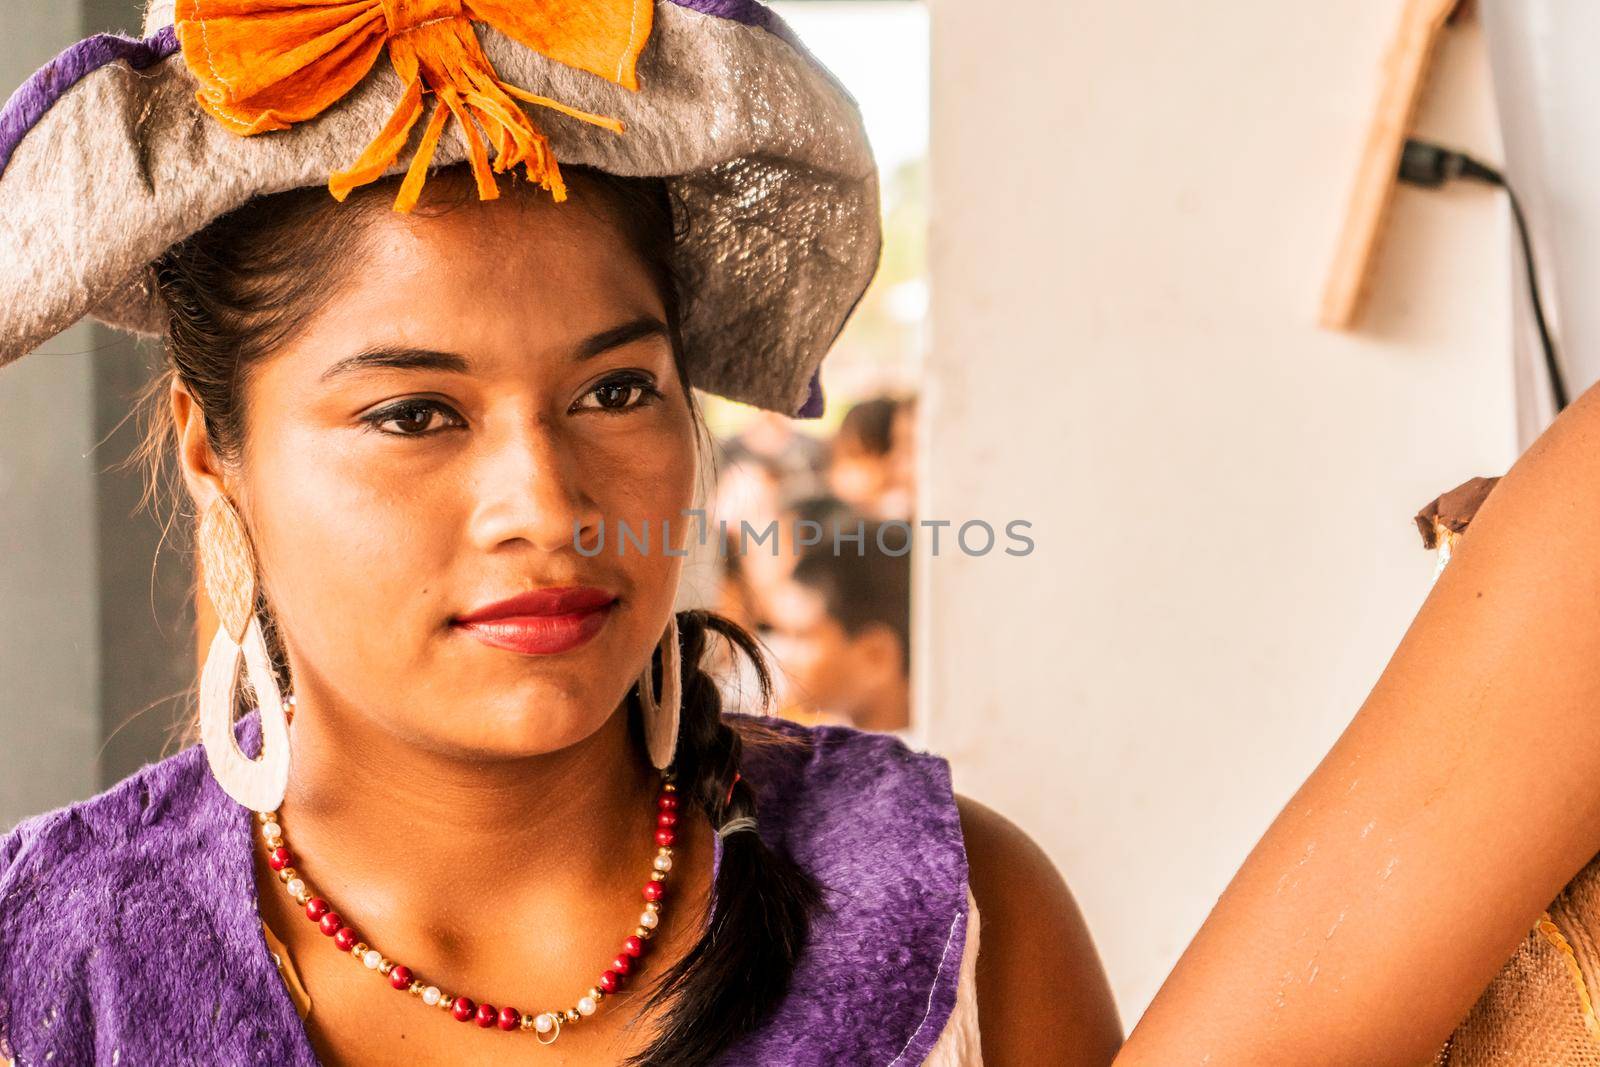 Indigenous woman with traditional clothing from the Miskito and Mayagna communities of the northern Caribbean of Nicaragua